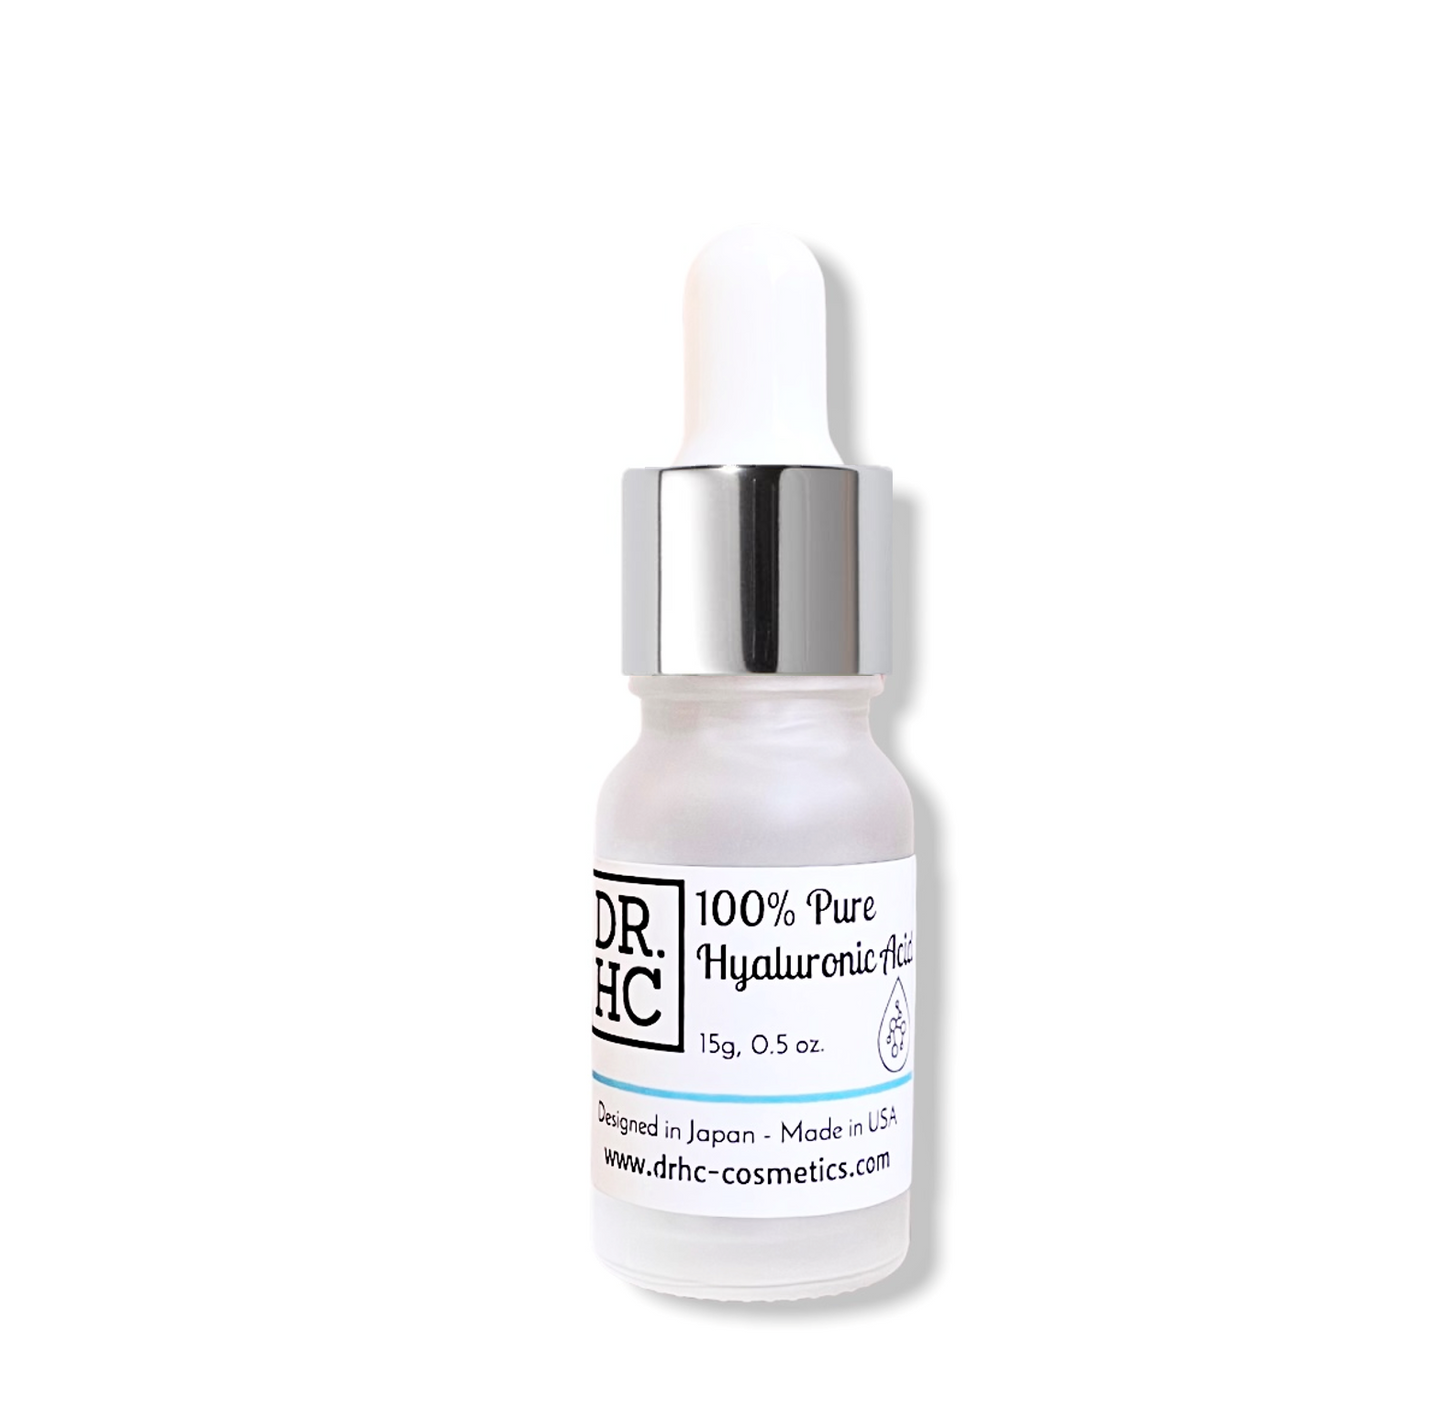 DR.HC 100% Pure Hyaluronic Acid (with 10% Hyaluronic Acid content) (15g, 0.5oz.) (Hydrating, Skin firming, Skin toning, Anti-acne...)-3